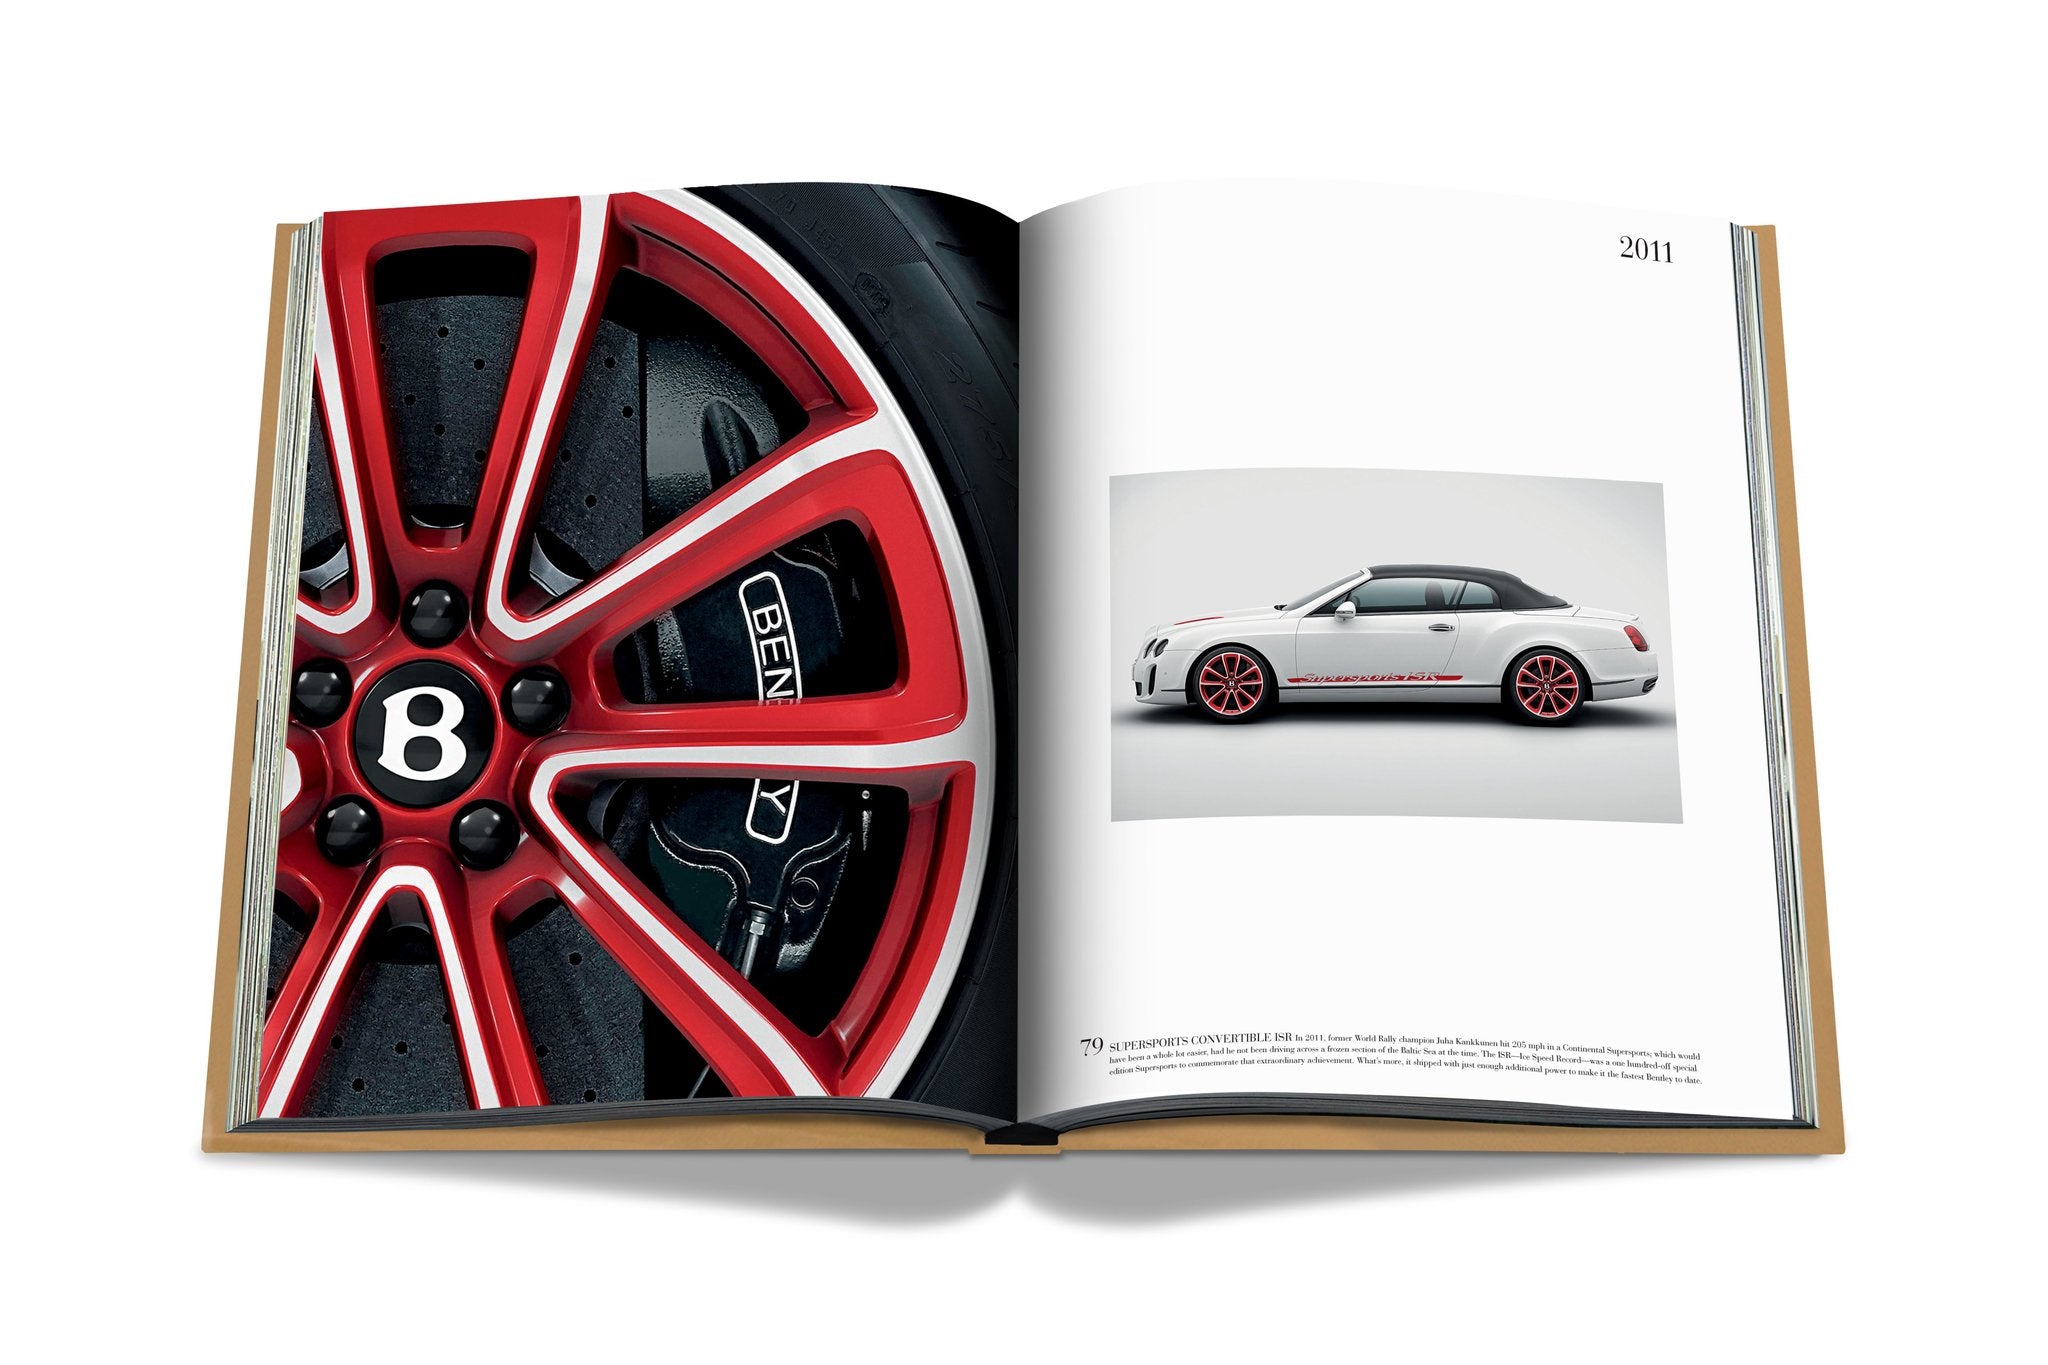 ASSOULINE The Impossible Collection of Bentley By Andrew Frankel